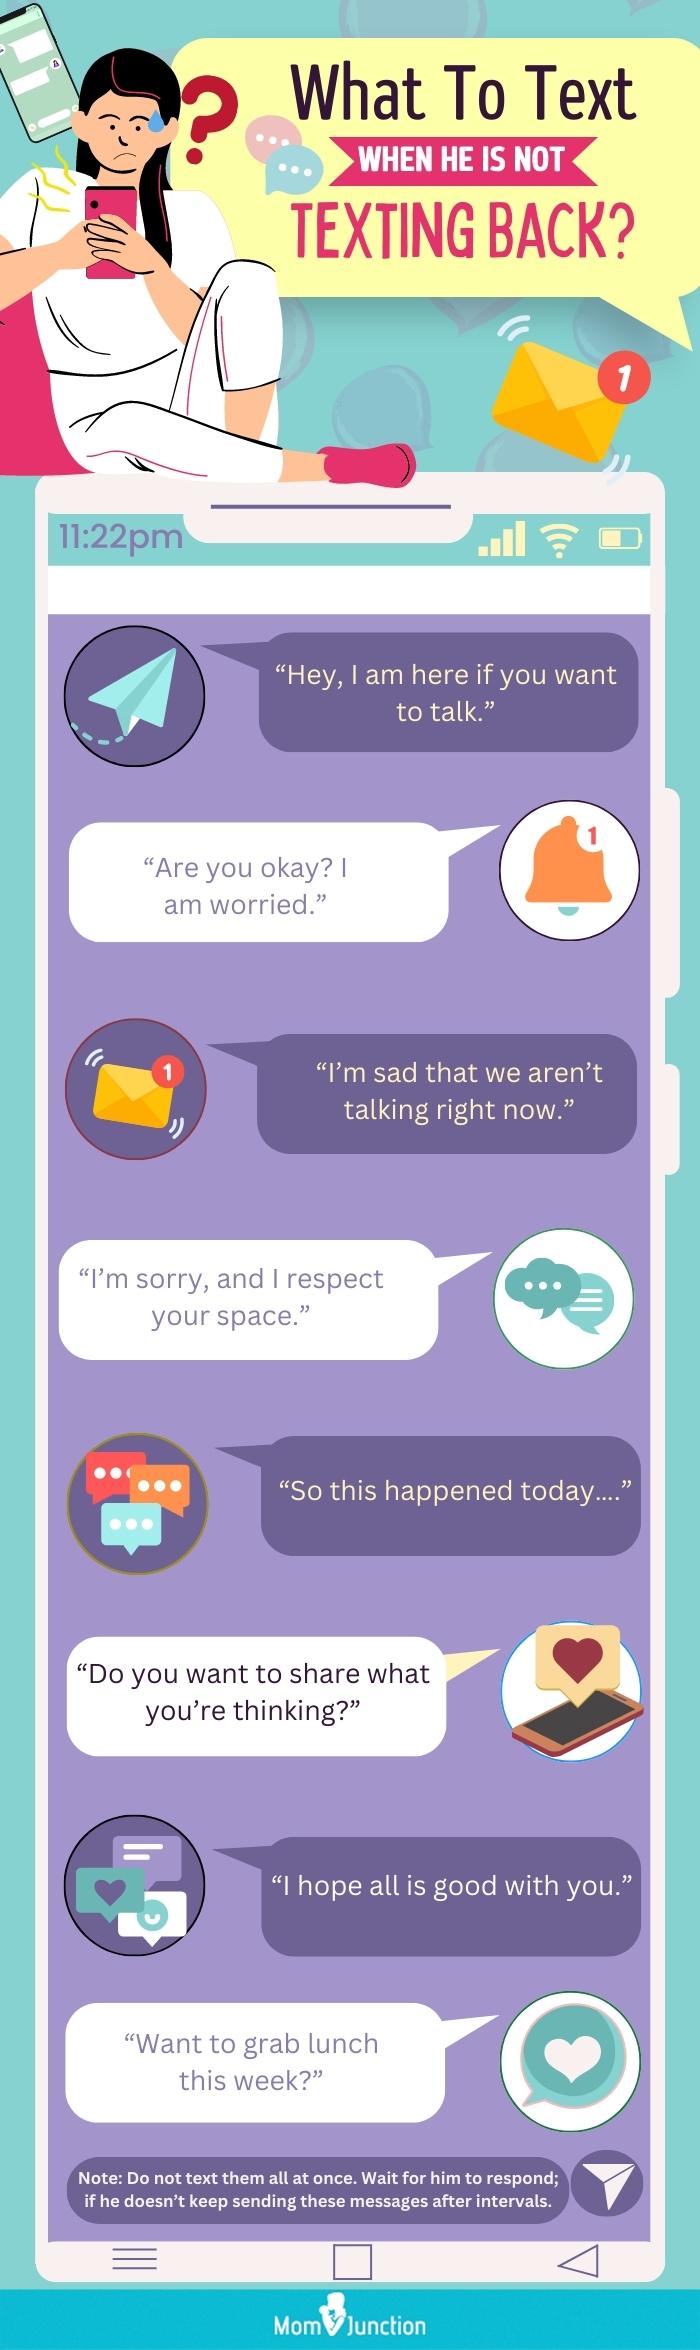 reasons why he might not be texting you back [infographic]